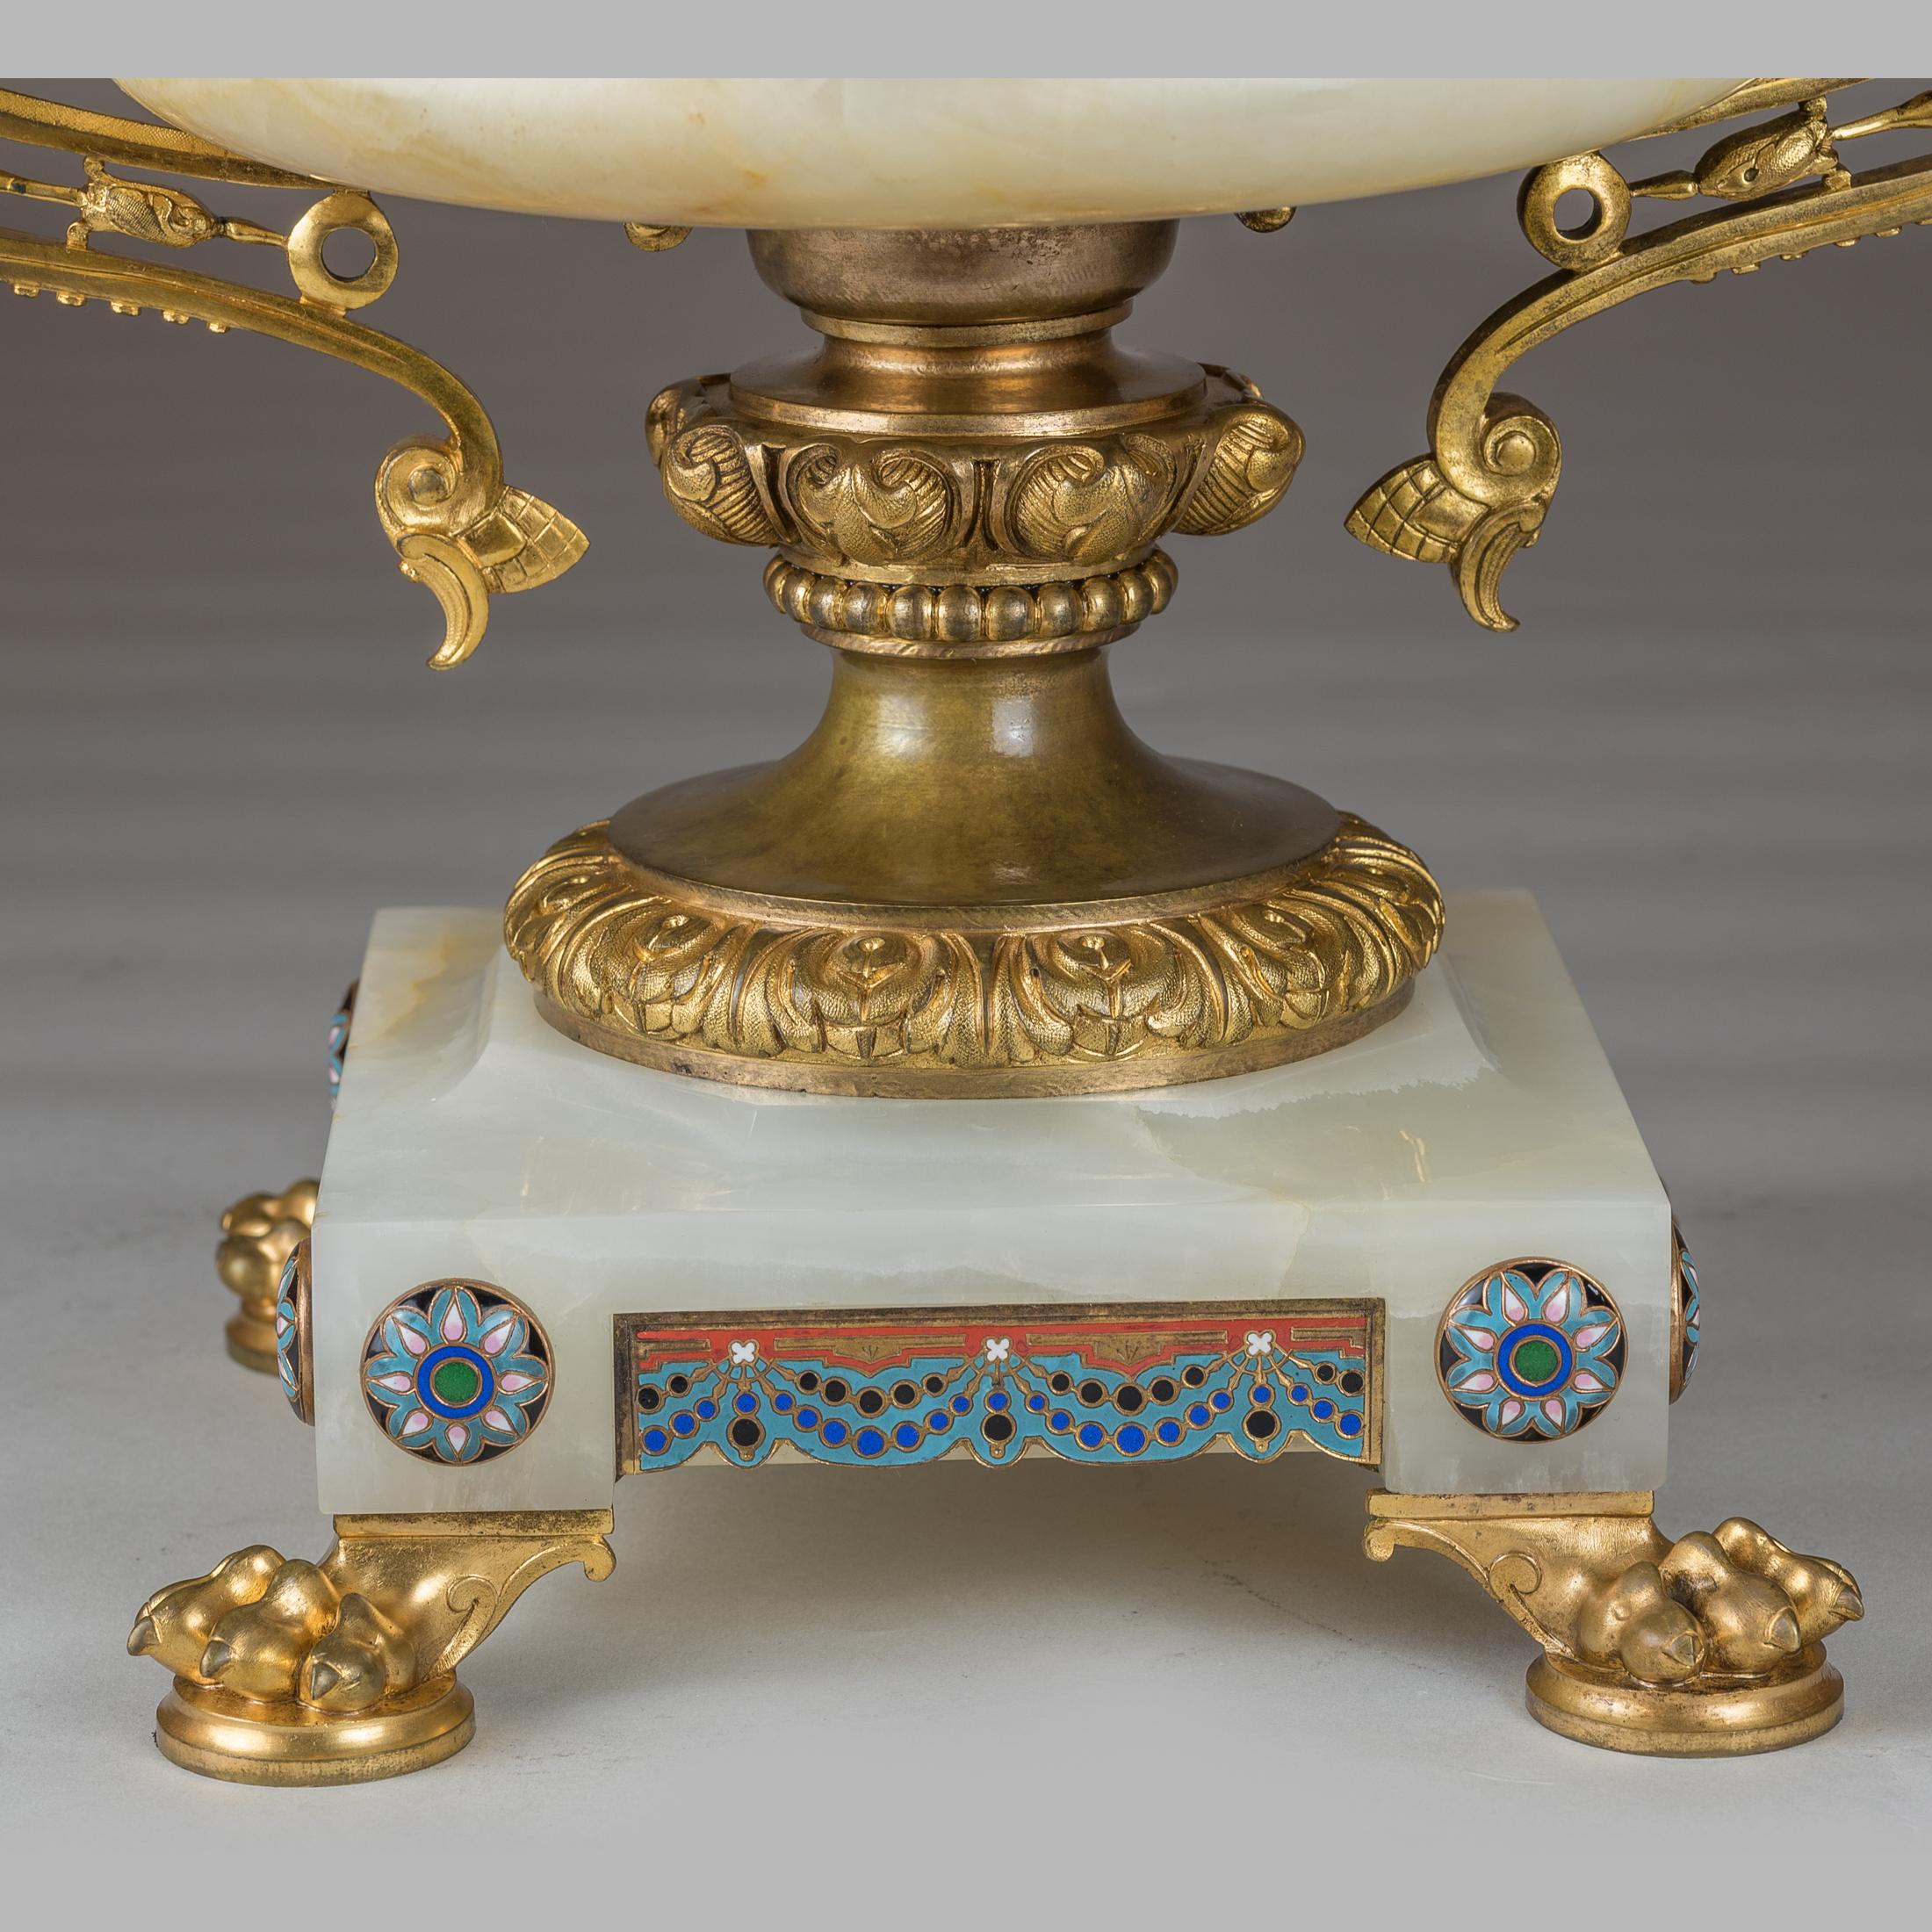 French 19th Century Large Gilt-Bronze Mounted Champlevé Enamel and Onyx Centrepiece